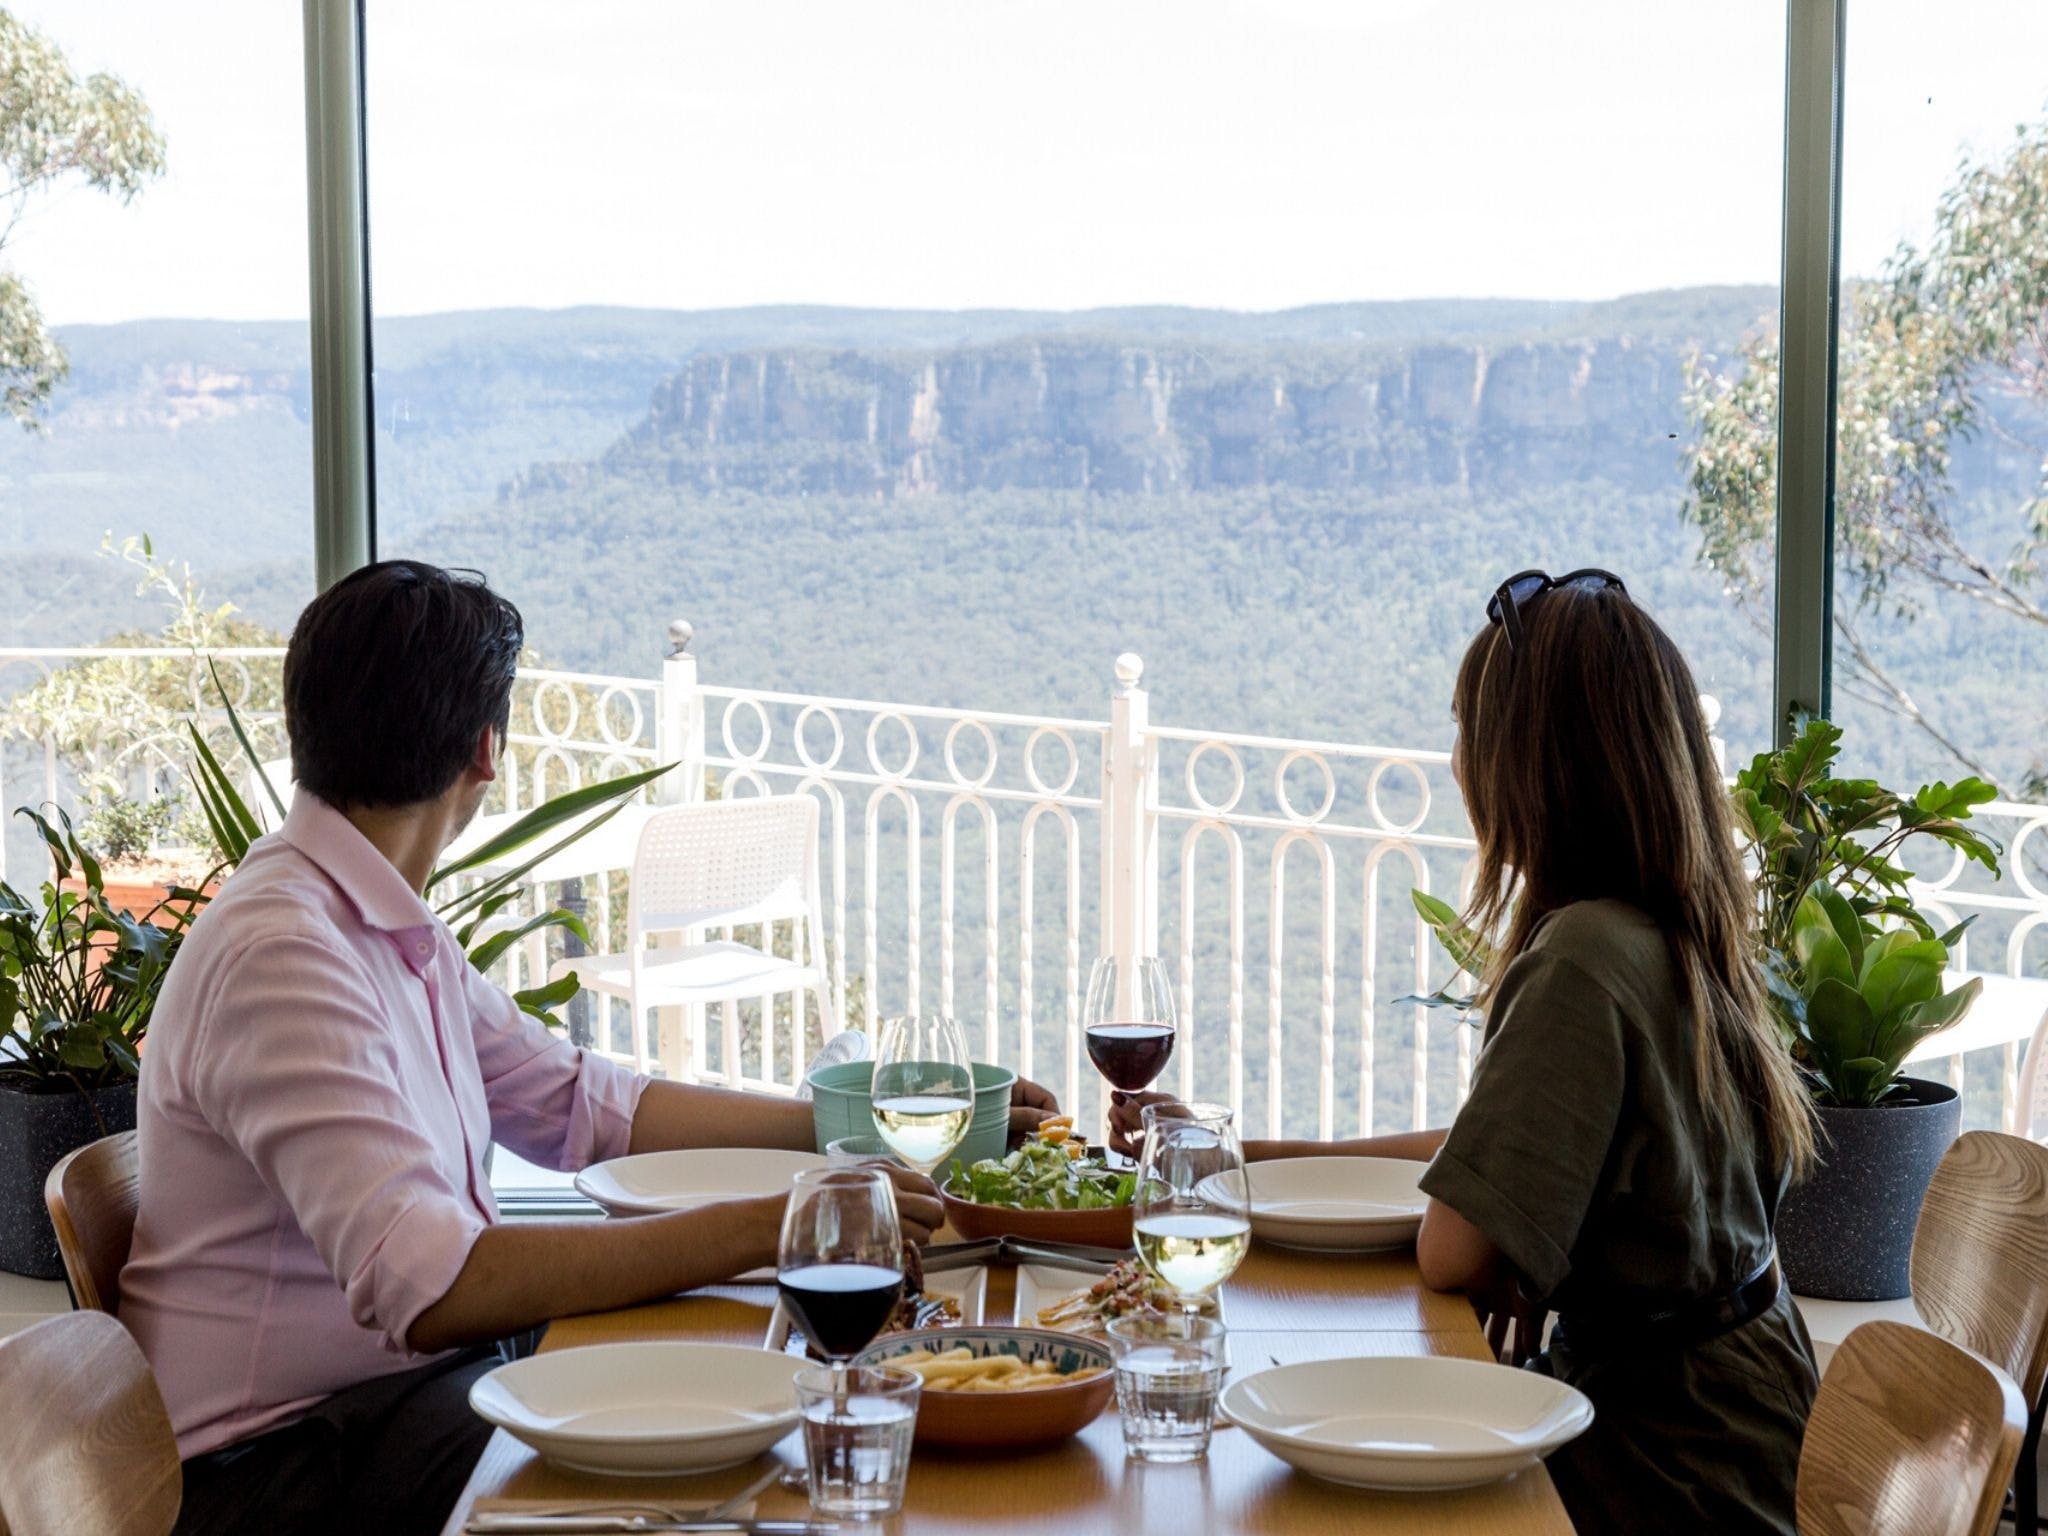 Christmas Day Lunch at The Lookout Echo Point - Carnarvon Accommodation